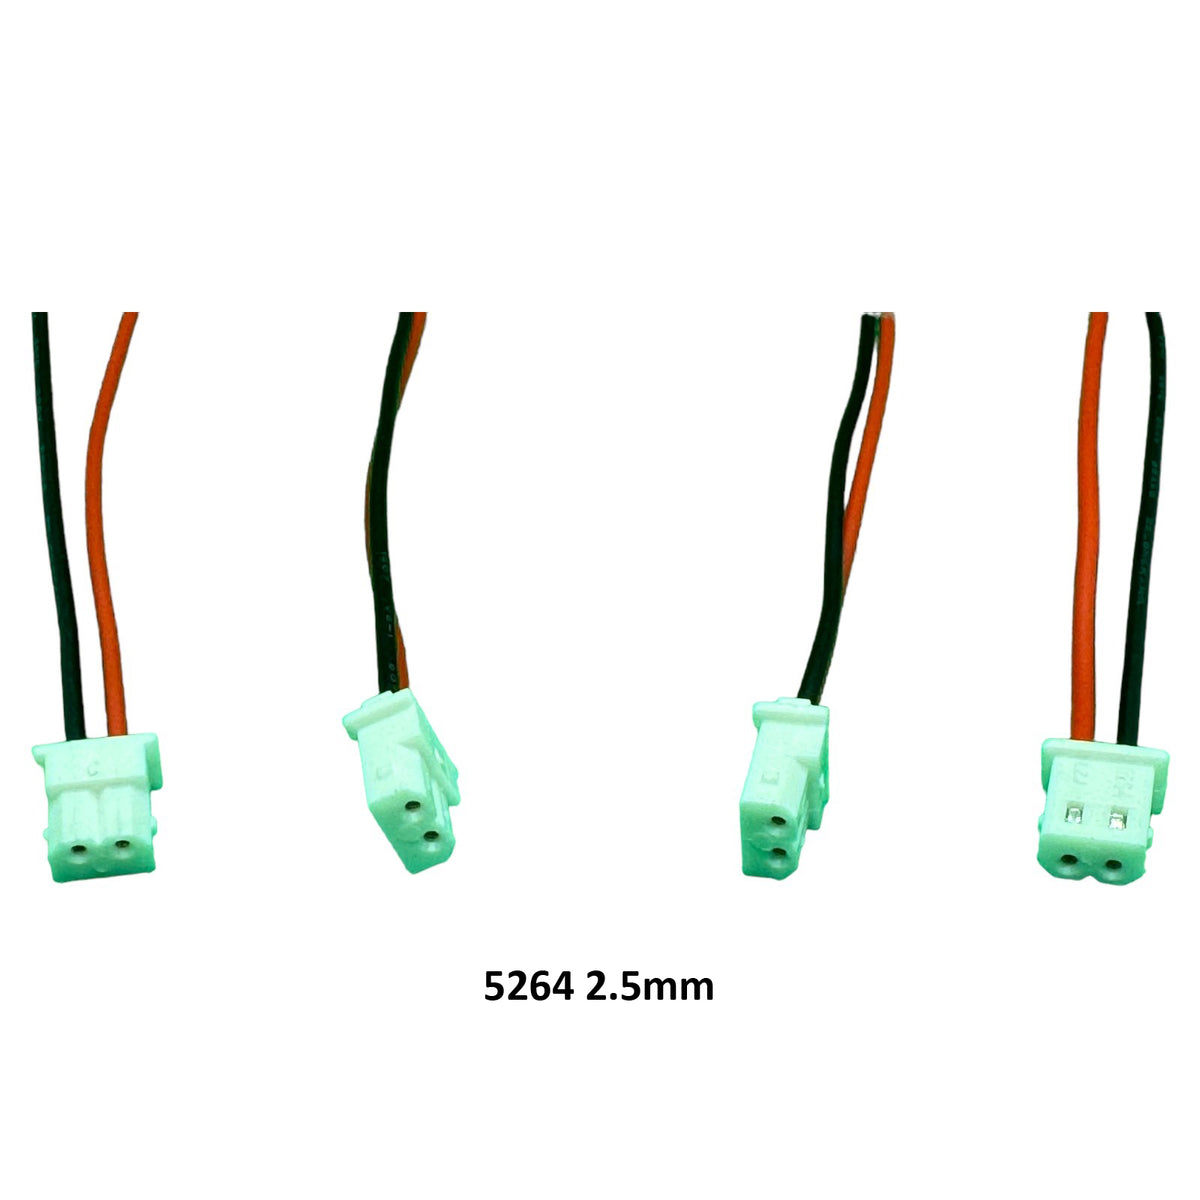 1S 3.7V 3400mAh Li-ion battery with 5264 2.5mm 2pin connector